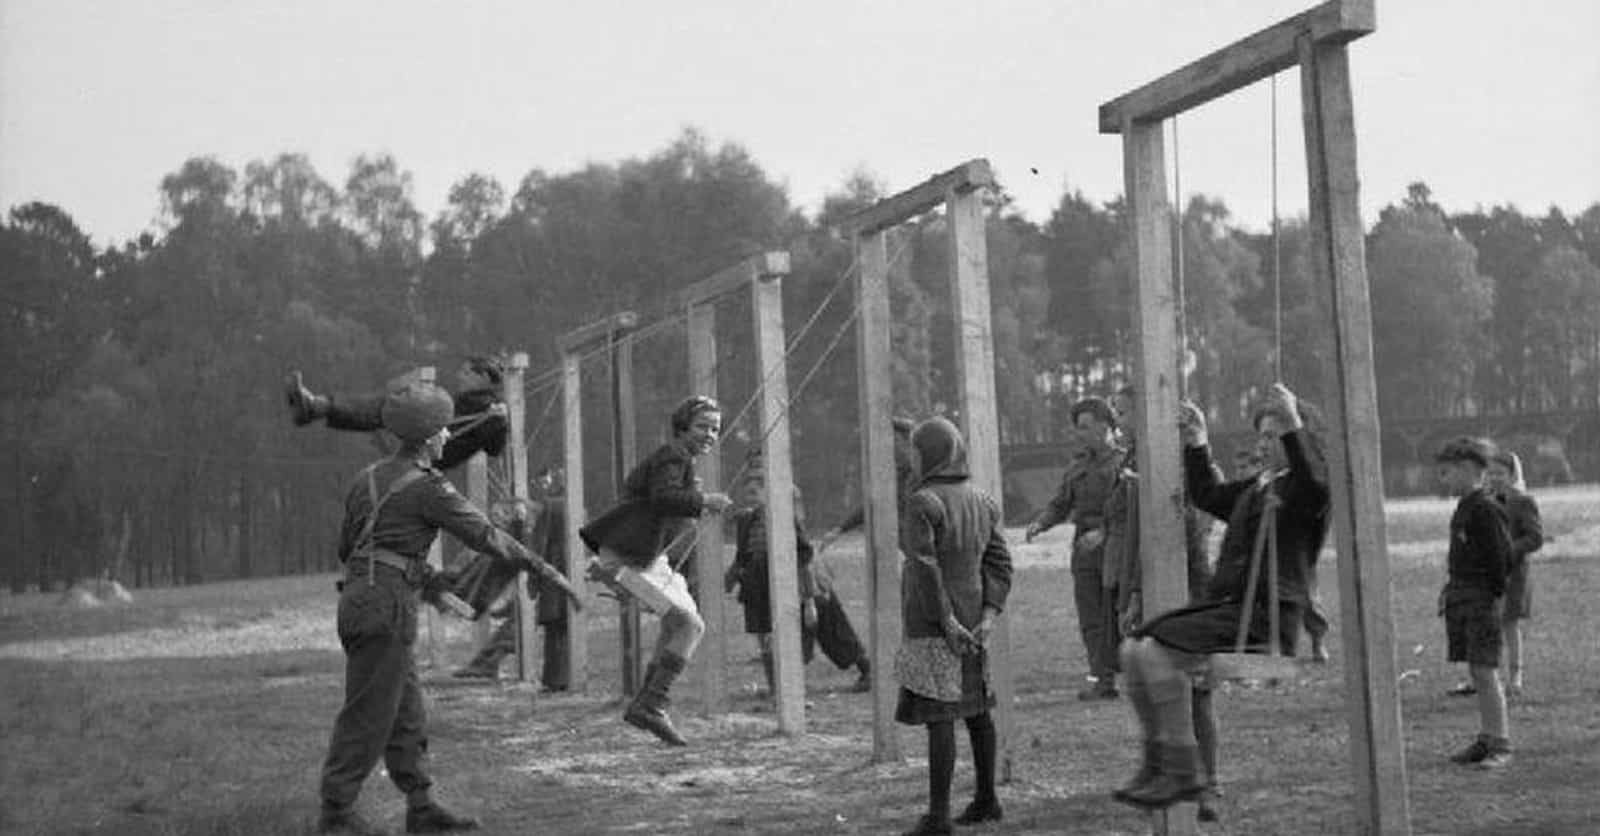 Moving Photos Showing The Liberation Of Concentration Camps During WWII